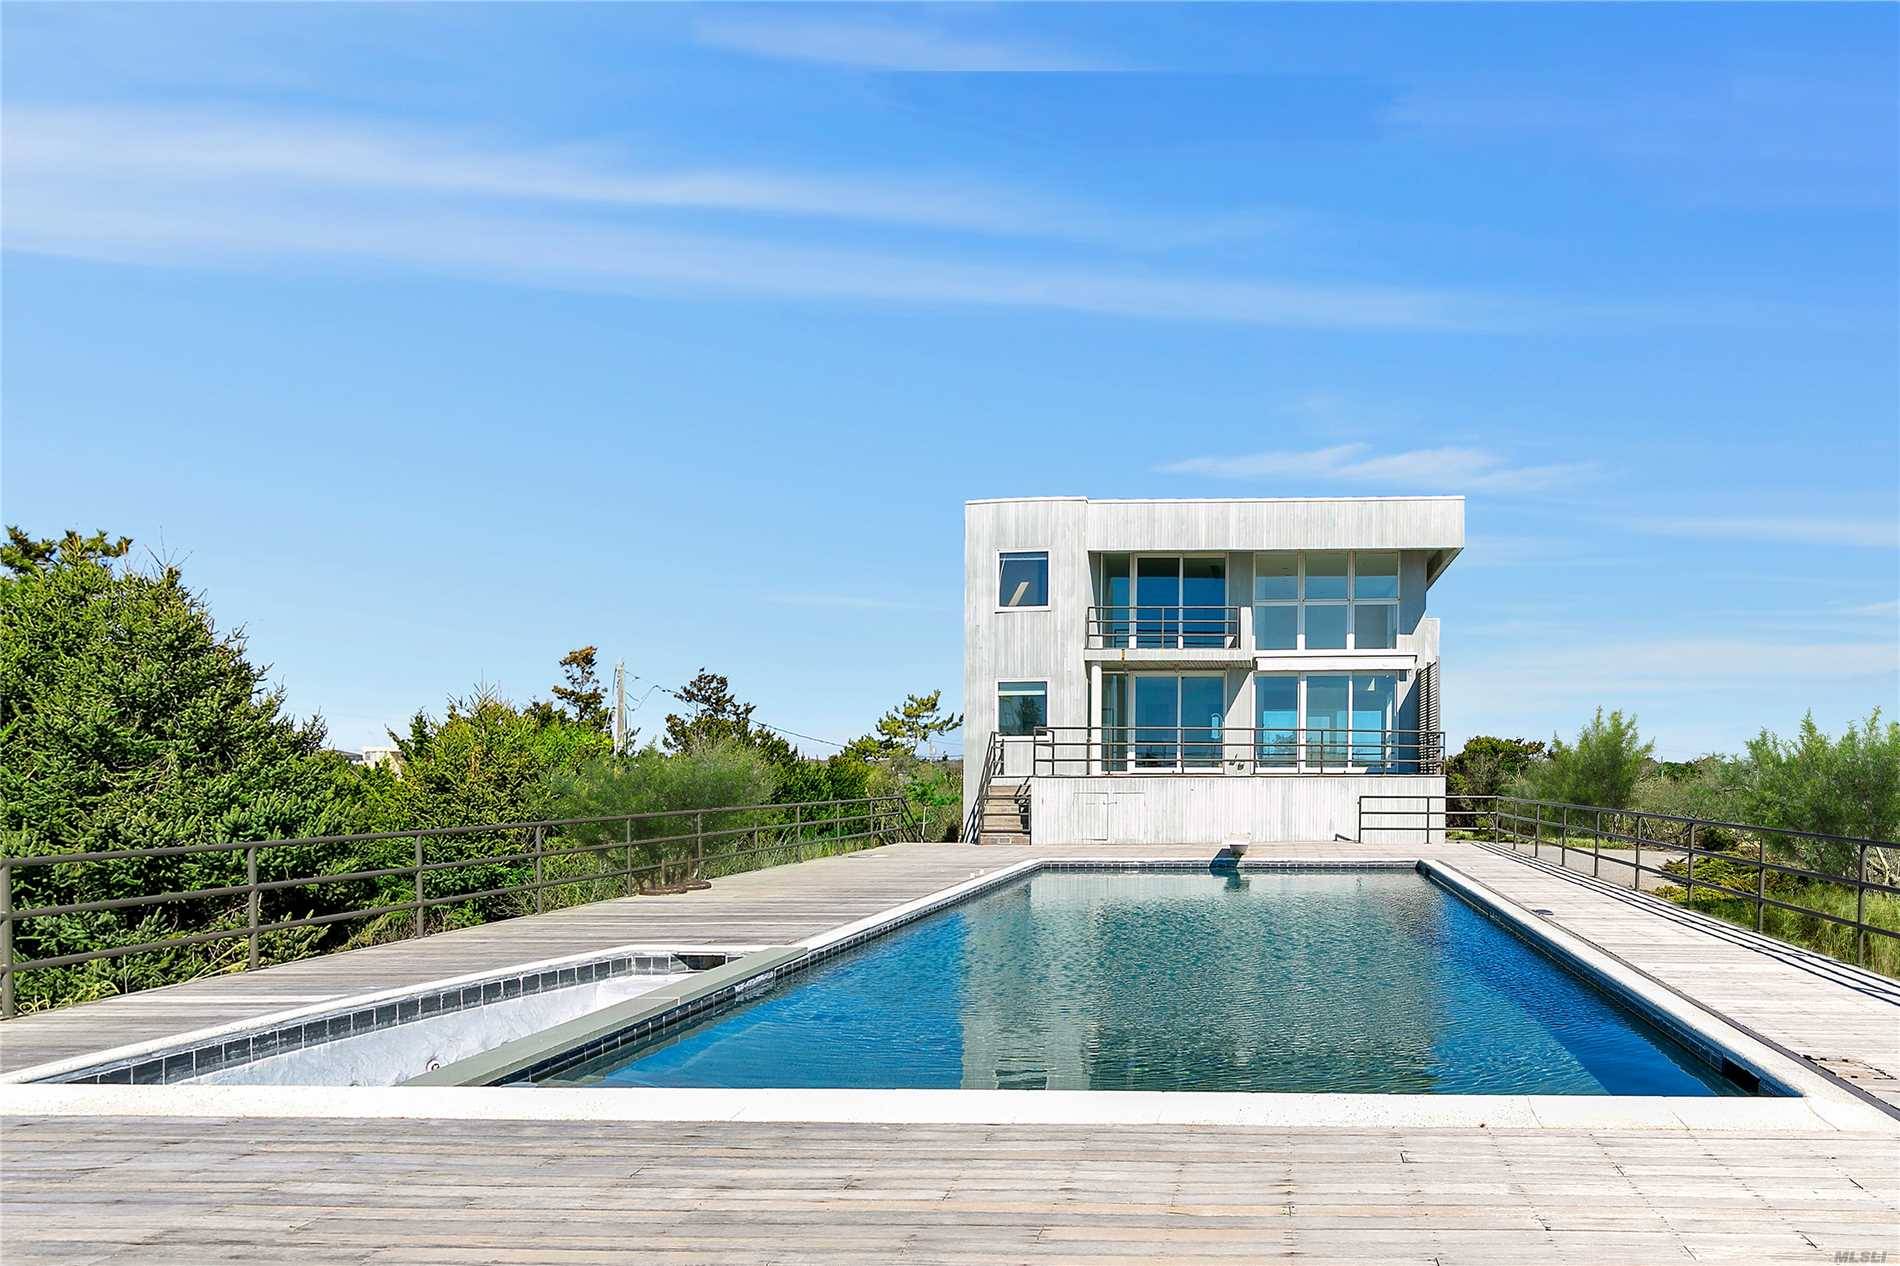 A truly magnificent contemporary sited on over 2 acres of Quogue Oceanfront.